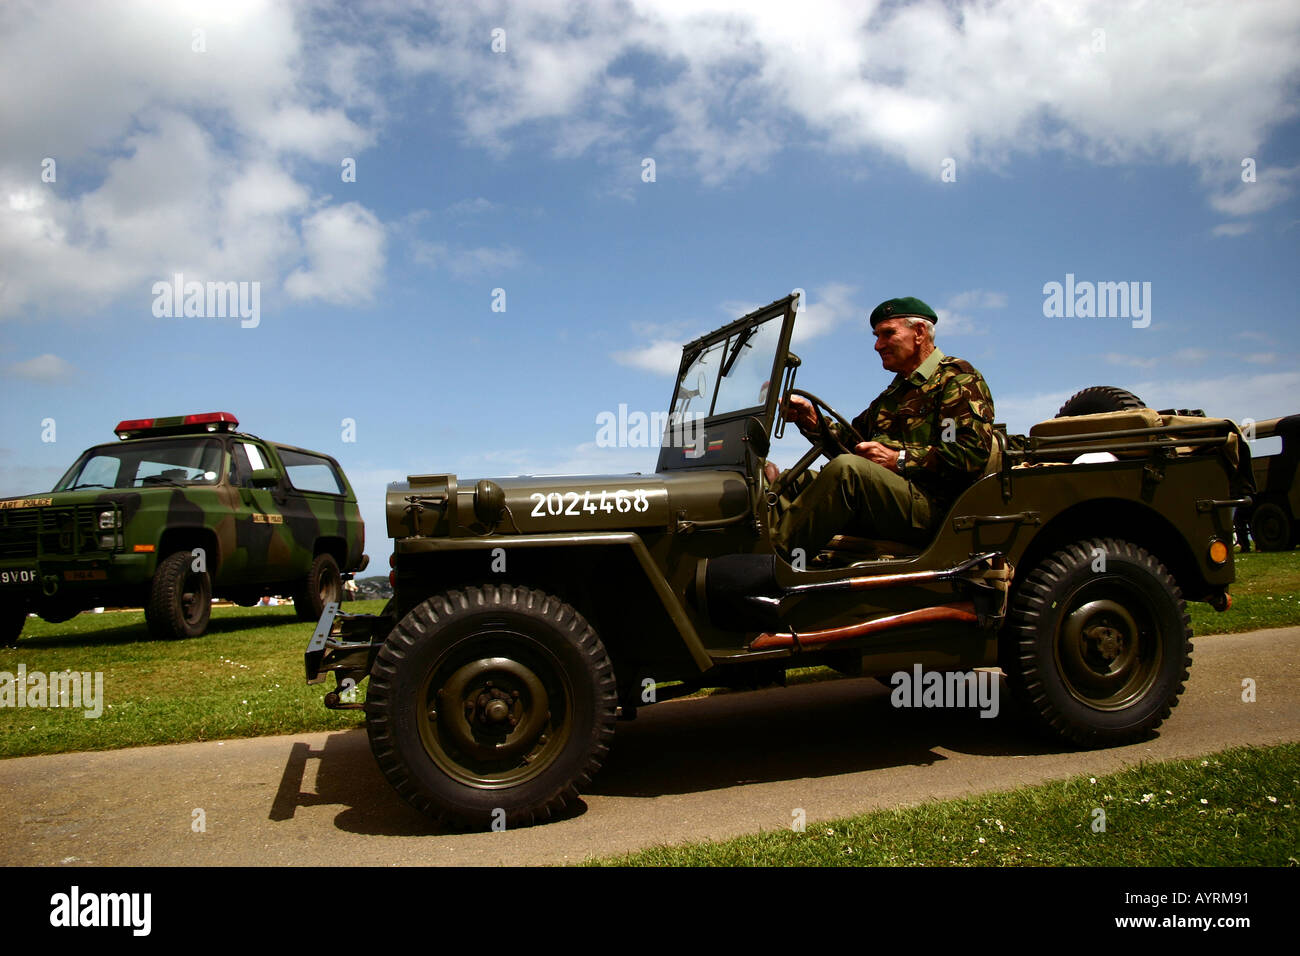 US Jeep at VE day aniversary celebrations, Pendennis Castle, Falmouth, Cornwall. 2005 Stock Photo